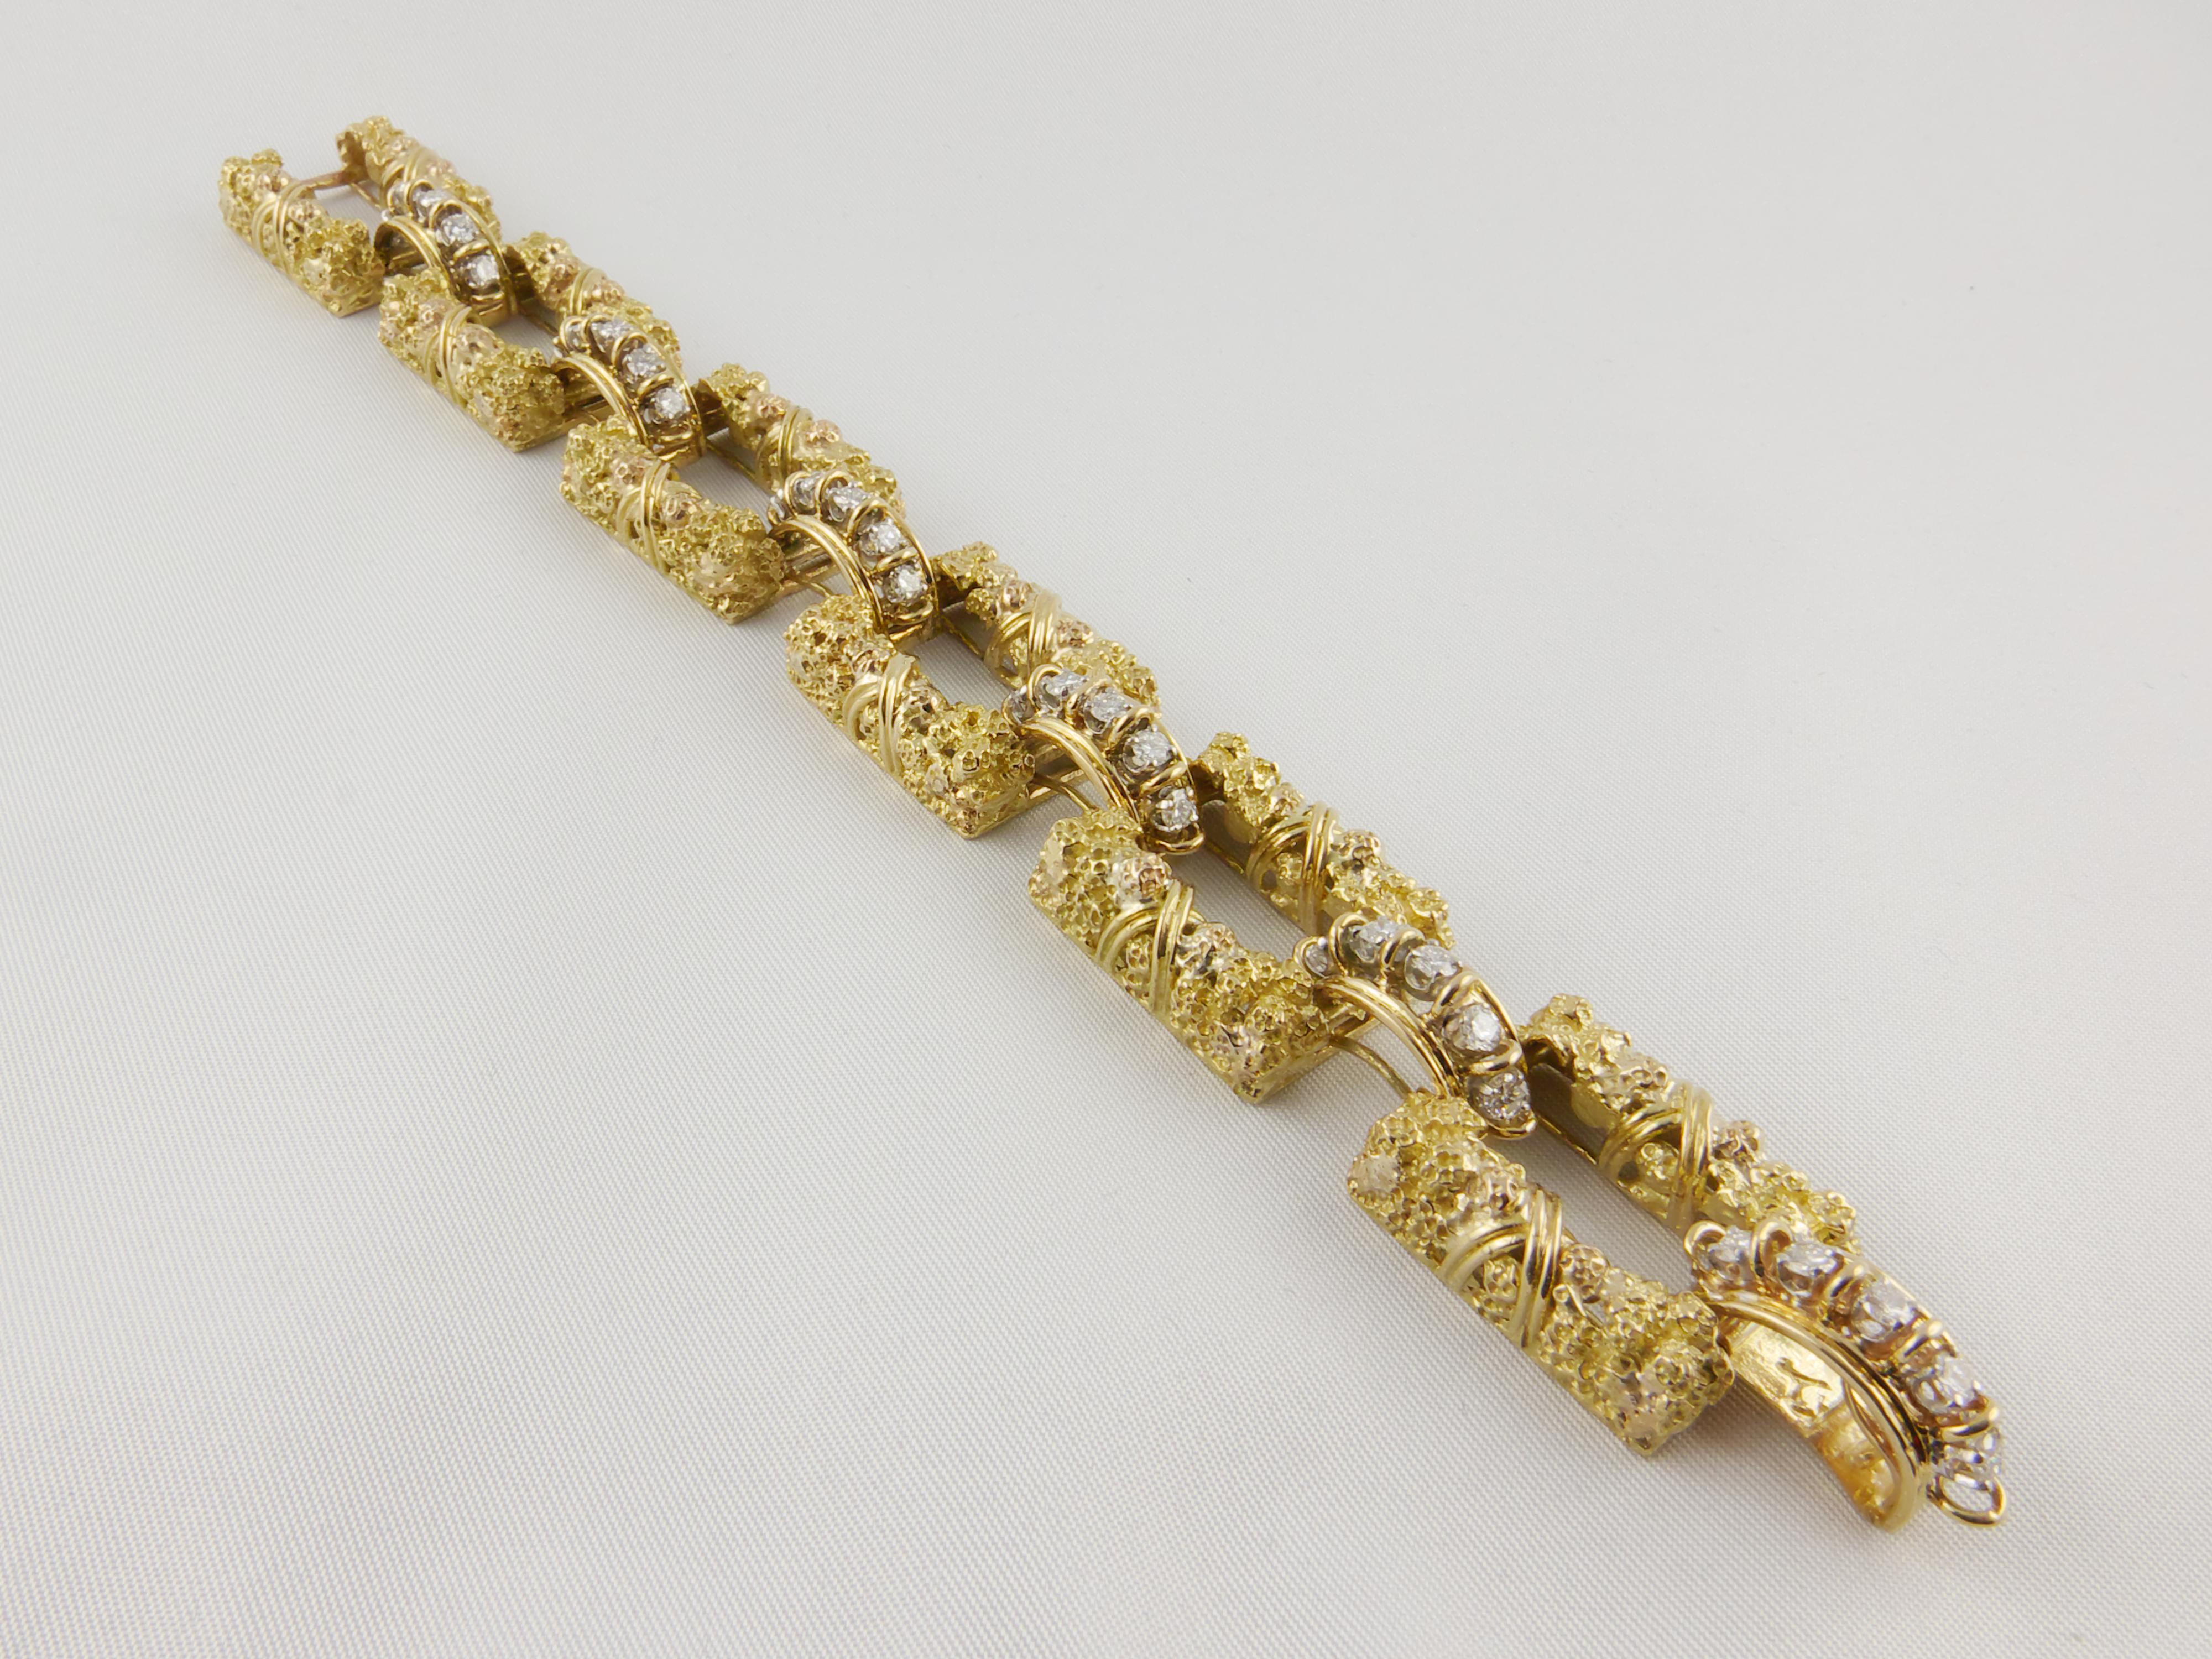 This elegant link Bracelet was finely crafted in the 1970's. Made by the modernist  jeweler Jack Gutschneider. The Bracelet is in 18K Yellow Gold with six beveled rectangle shaped raised links held together by six diamond bar links. Each link is